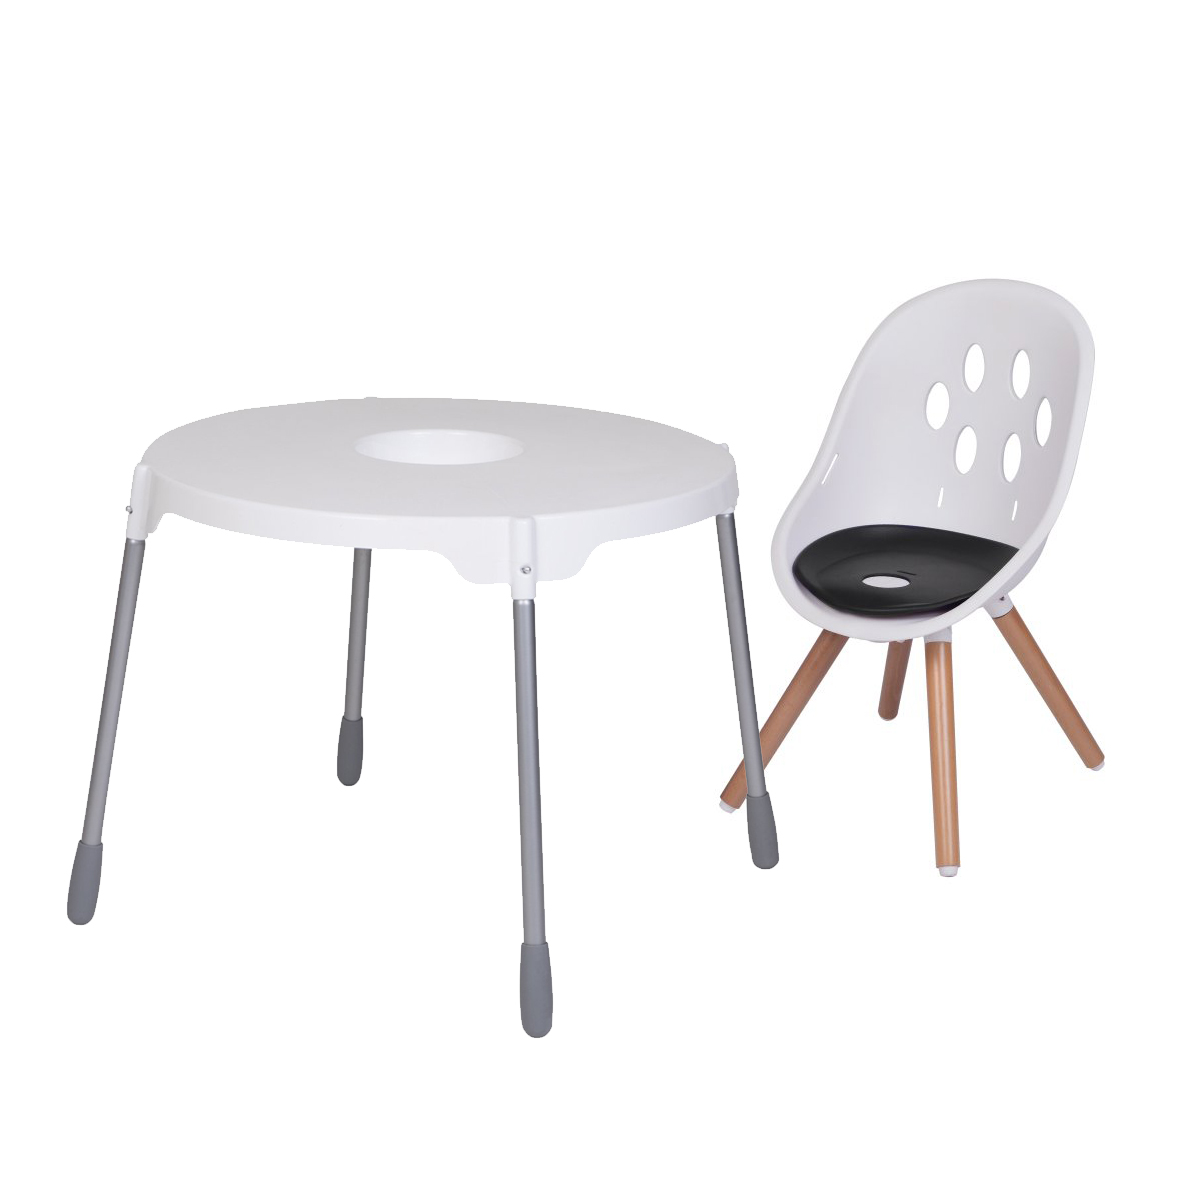 https://cdn.accentuate.io/4560618815522/19437753335986/phil_and_teds_poppy_wood_leg_high_chair_to_my_chair_dual_modes_1_combo-v1630984547535.jpg?1200x1200